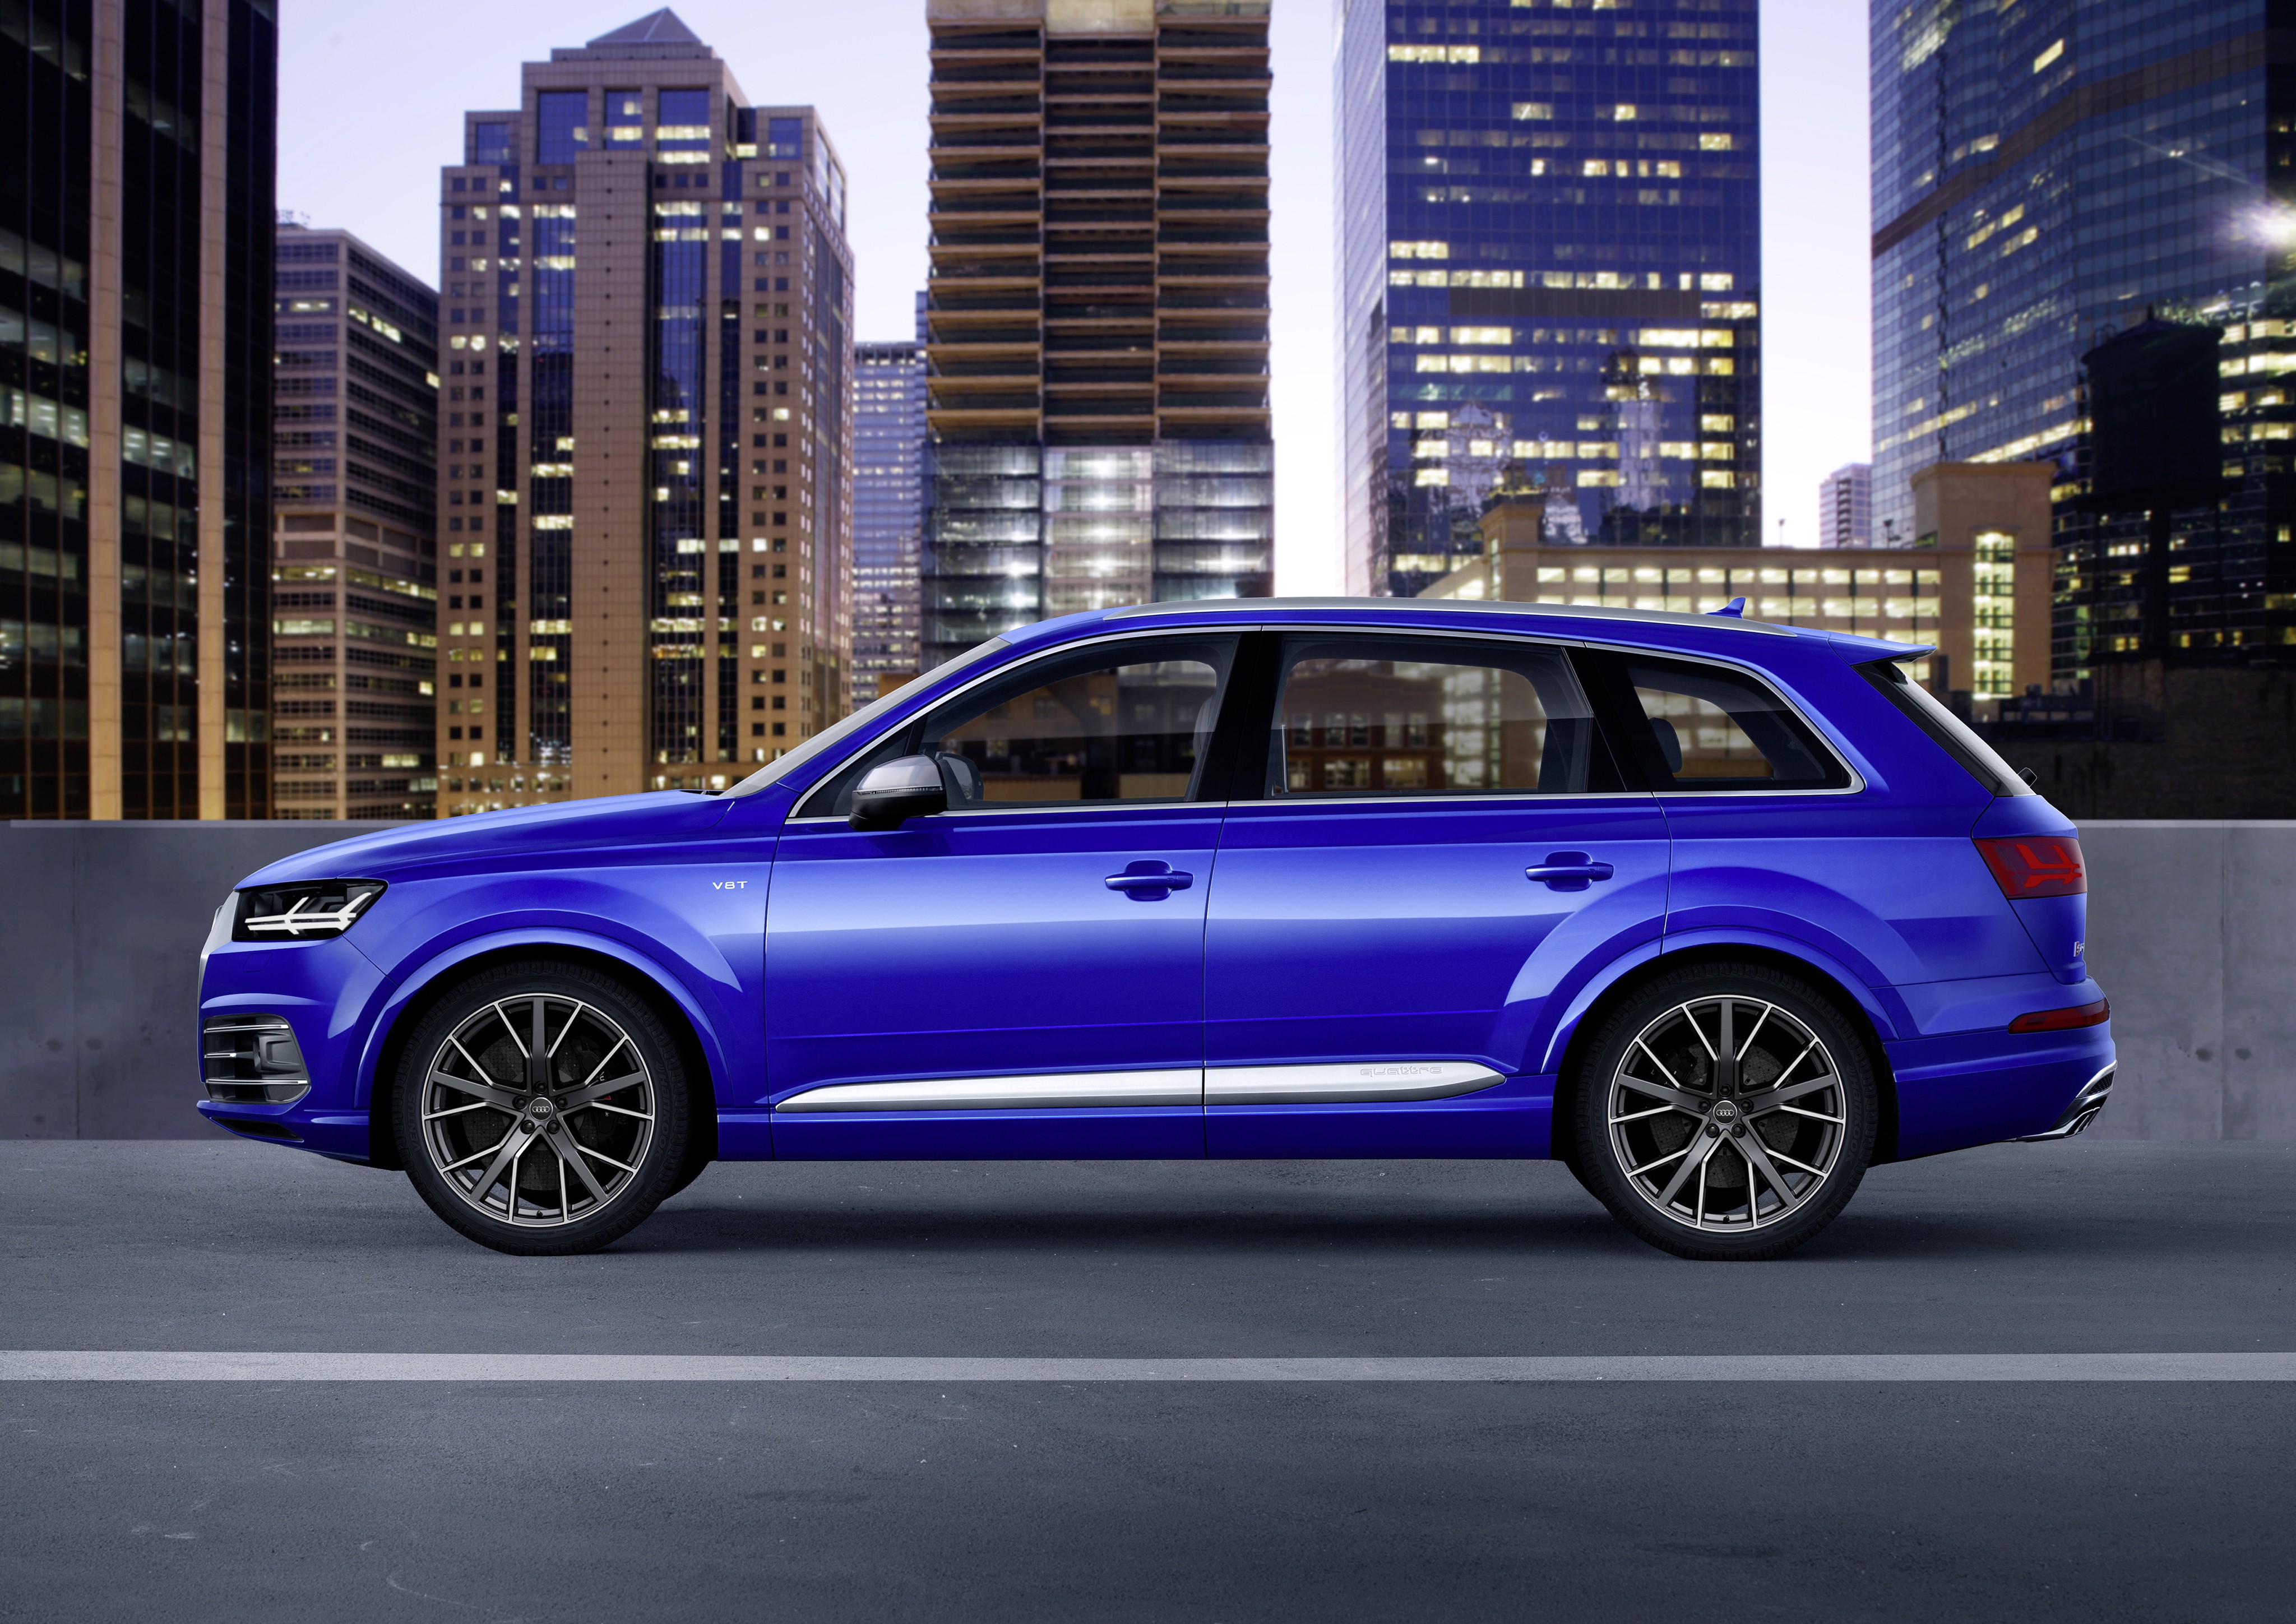 Audi SQ7 suv specifications